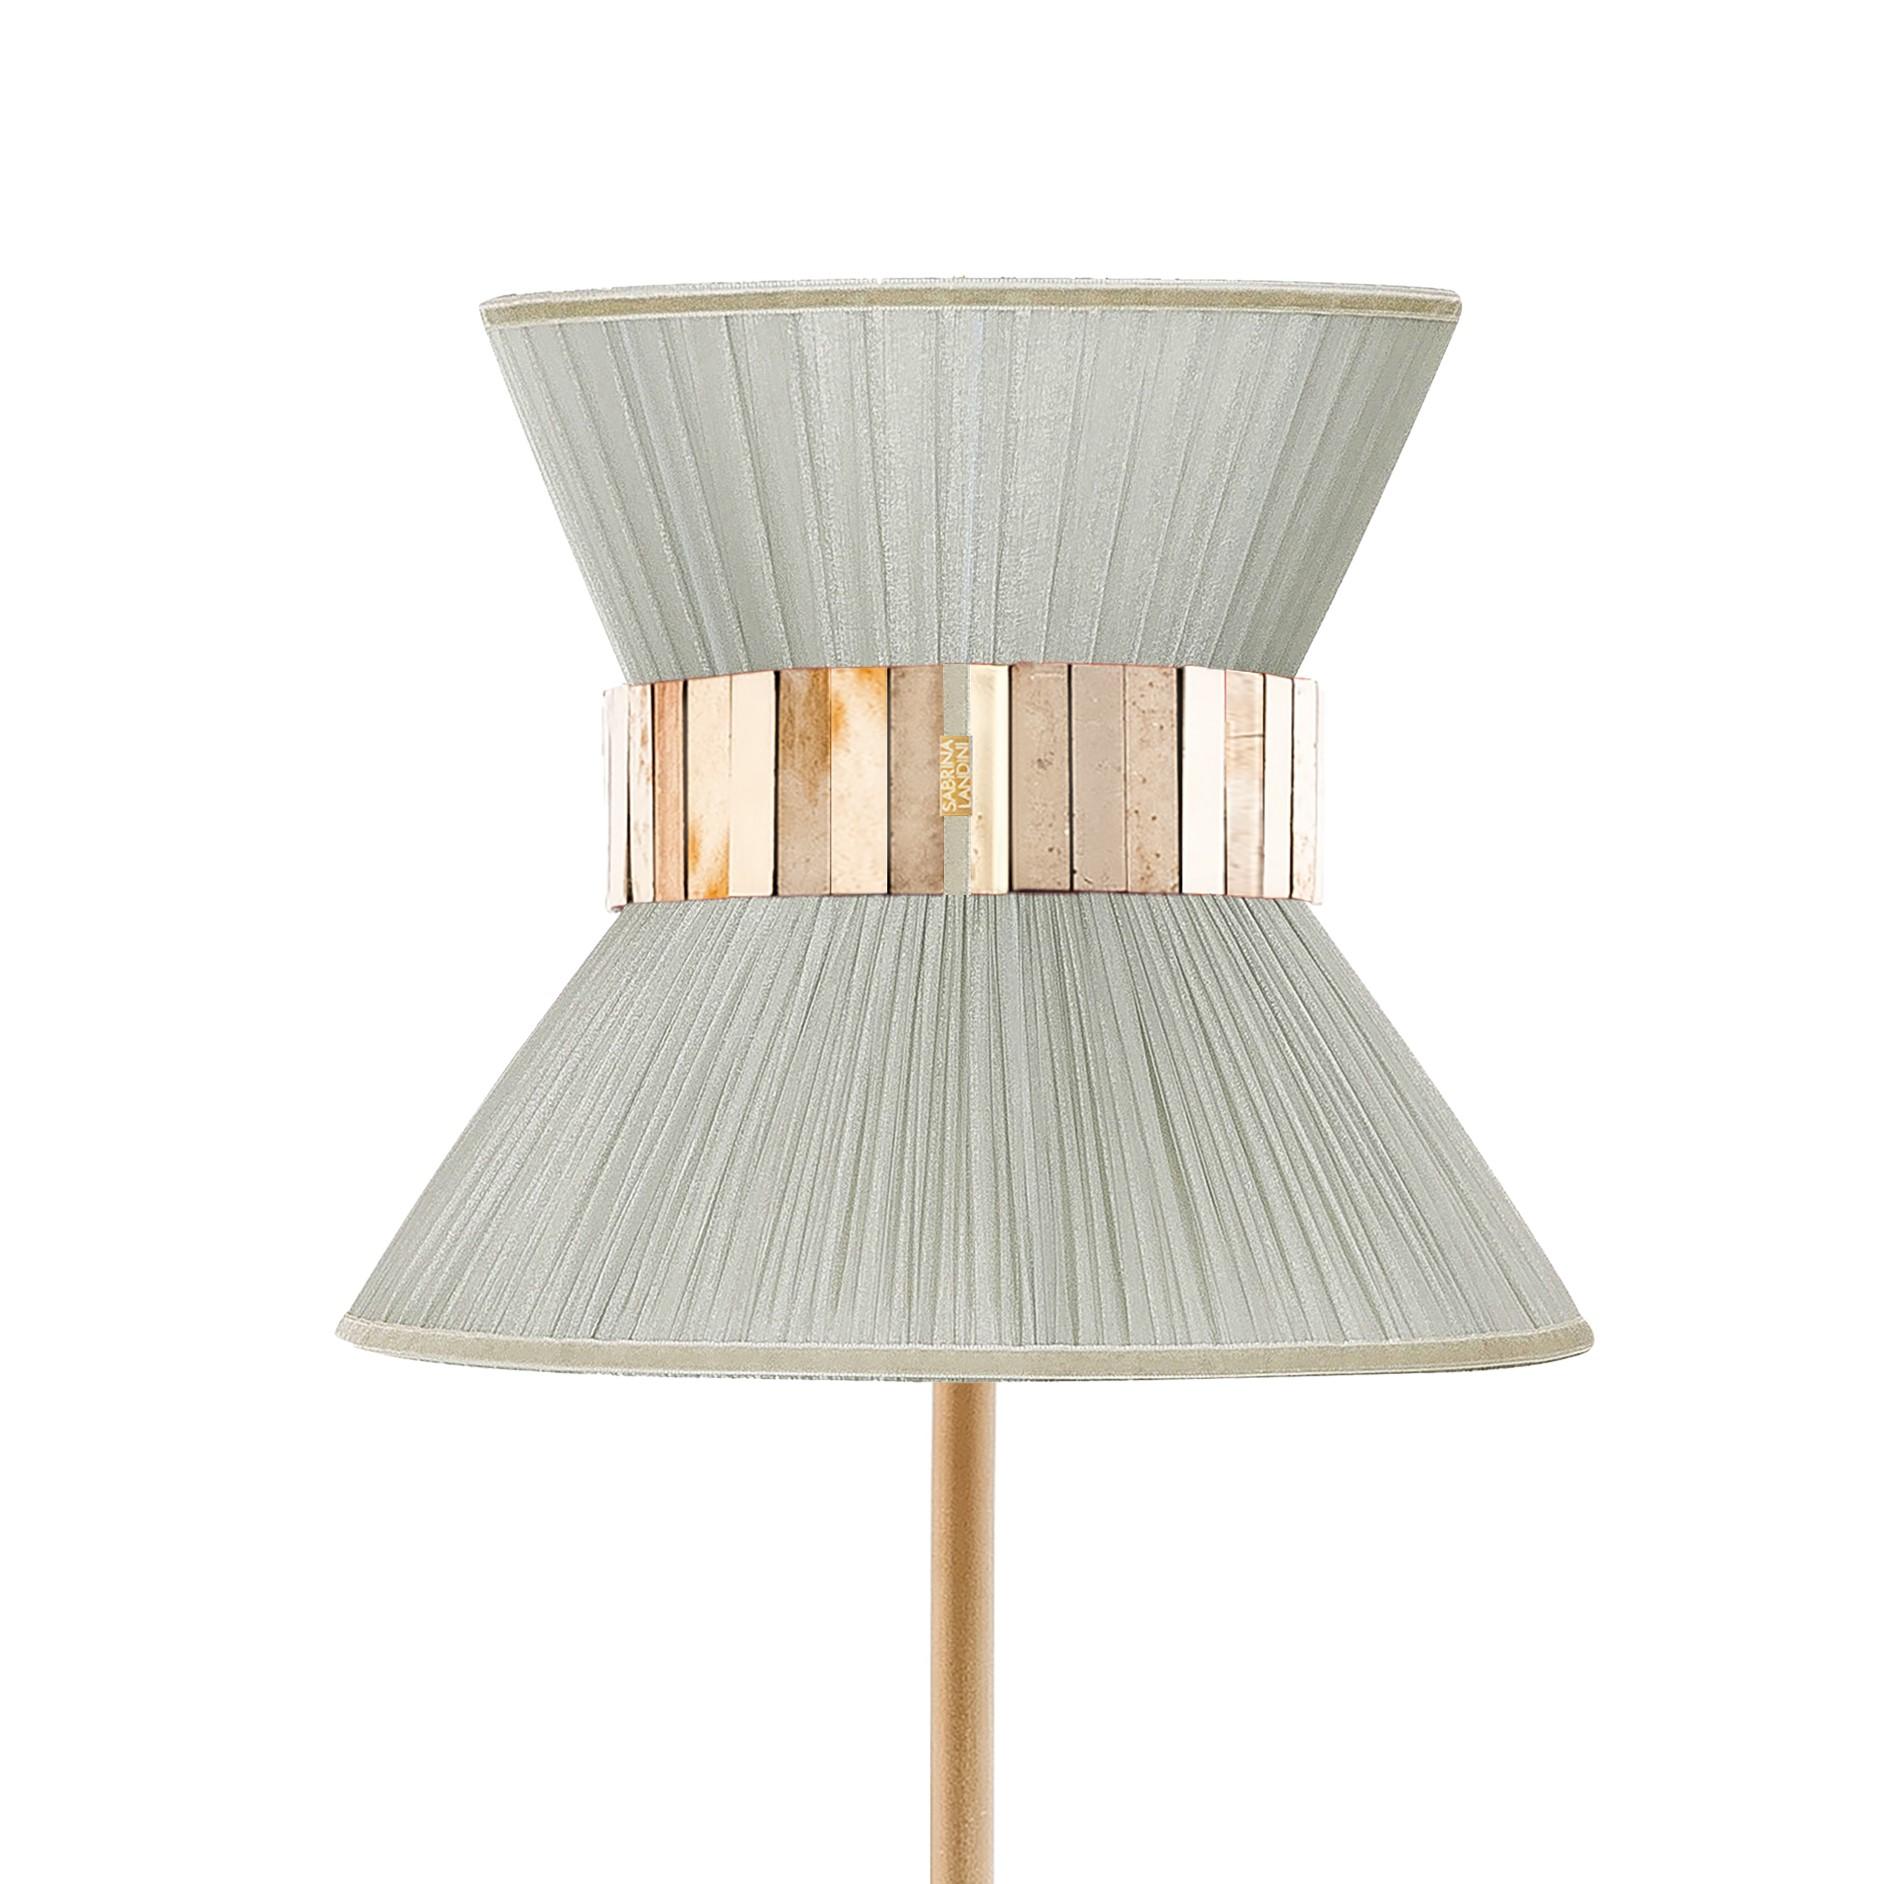 TIFFANY the iconic lamp!

Tiffany, a timeless lamp, inspired by the international movie “Breakfast at Tiffany” and the talented character Audrey Hepburn, is a contemporary lamp, entirely made in Tuscany, Italy and 100% of Italian origin.

Thanks to